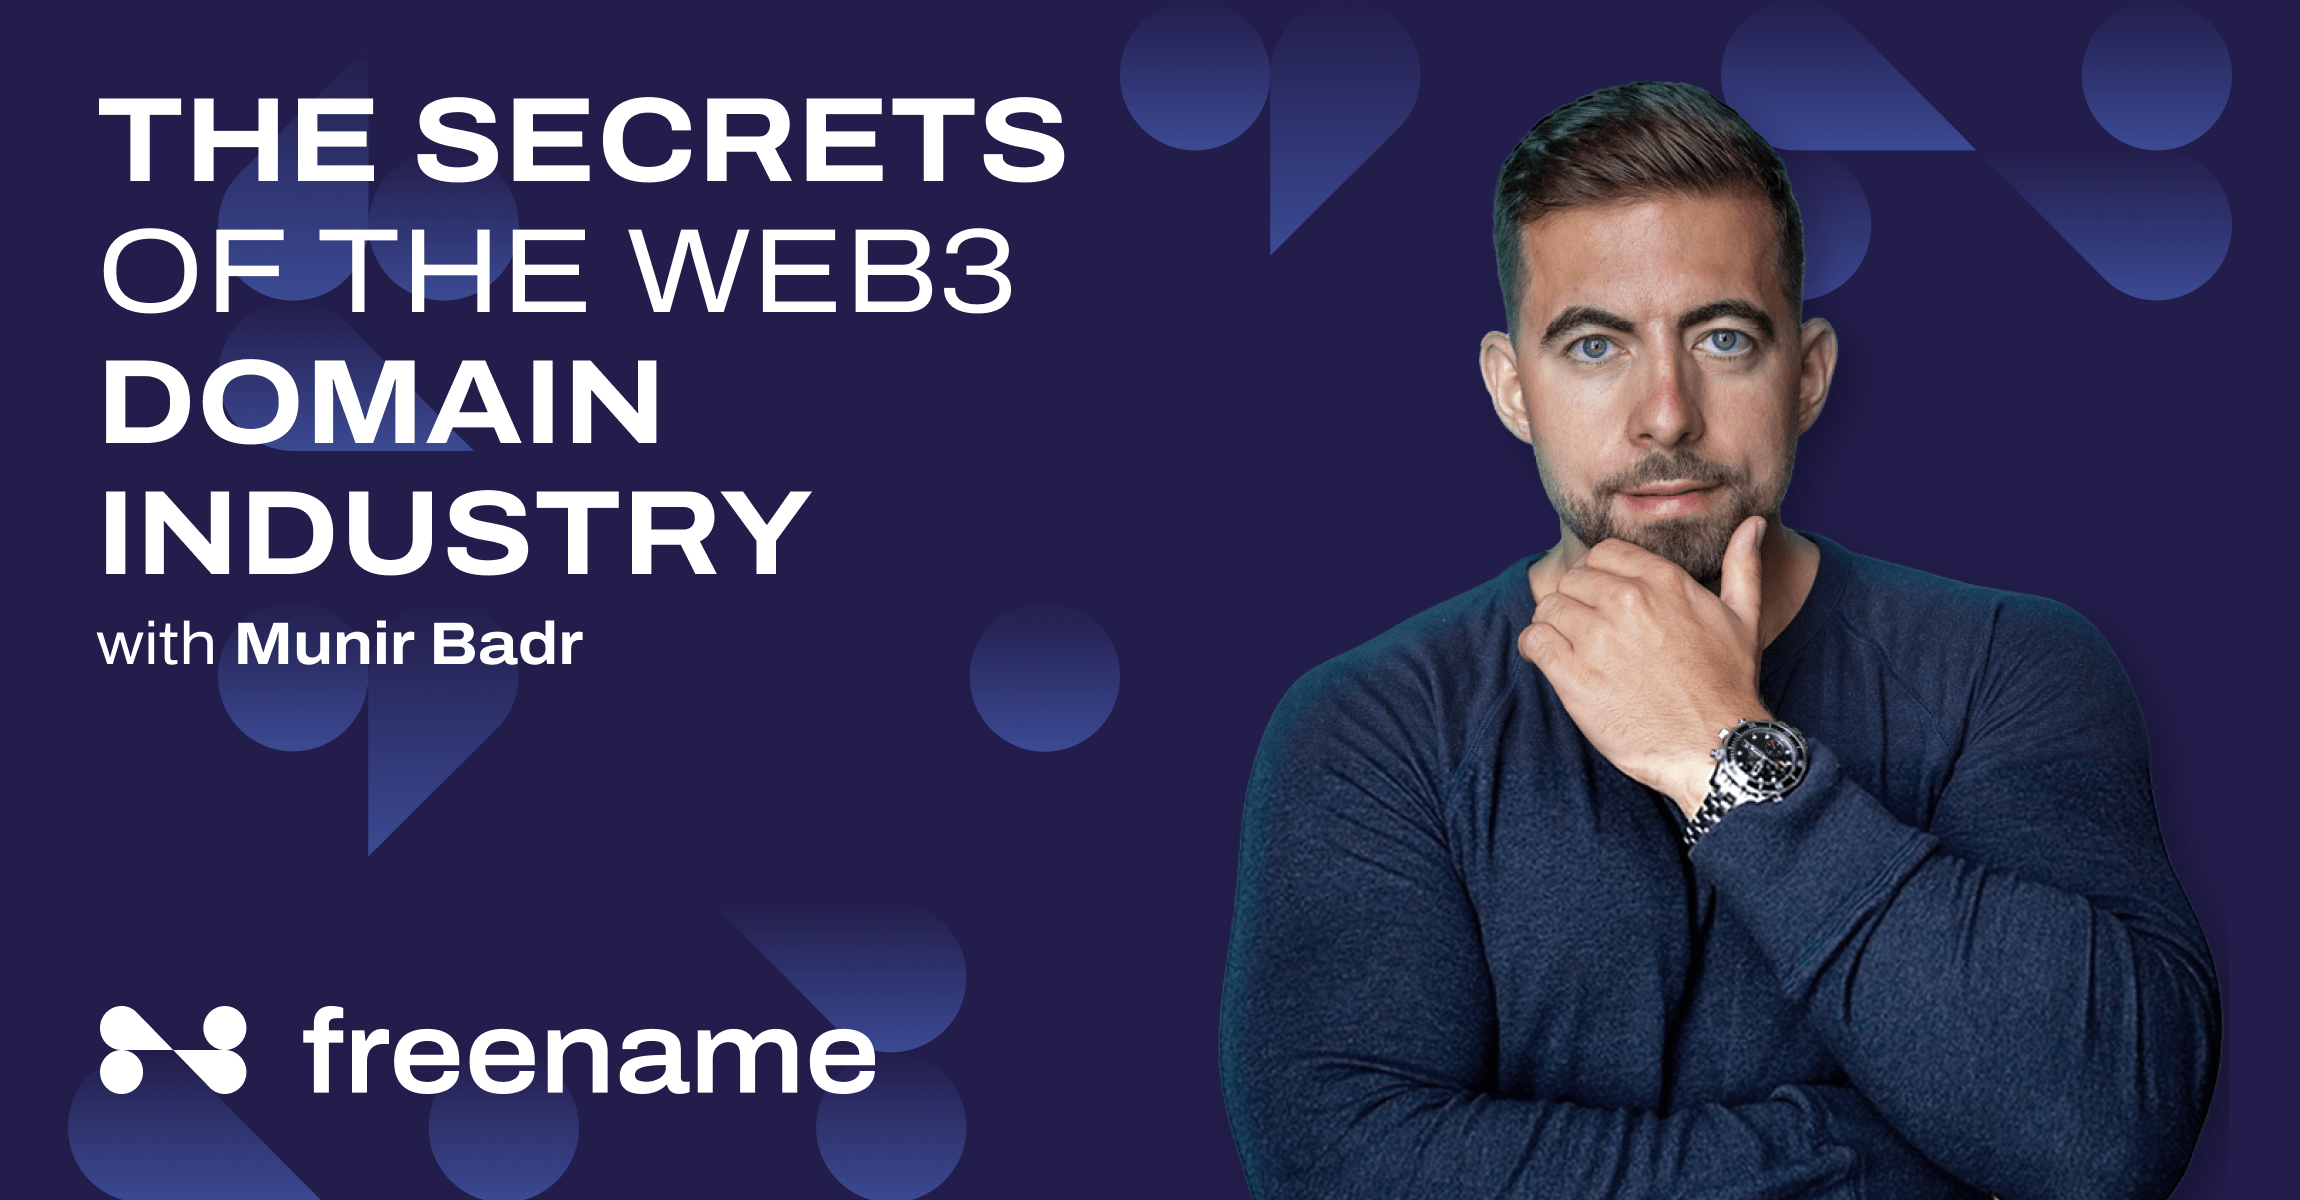 The Secrets of the Web3 Domain Industry with Munir Badr